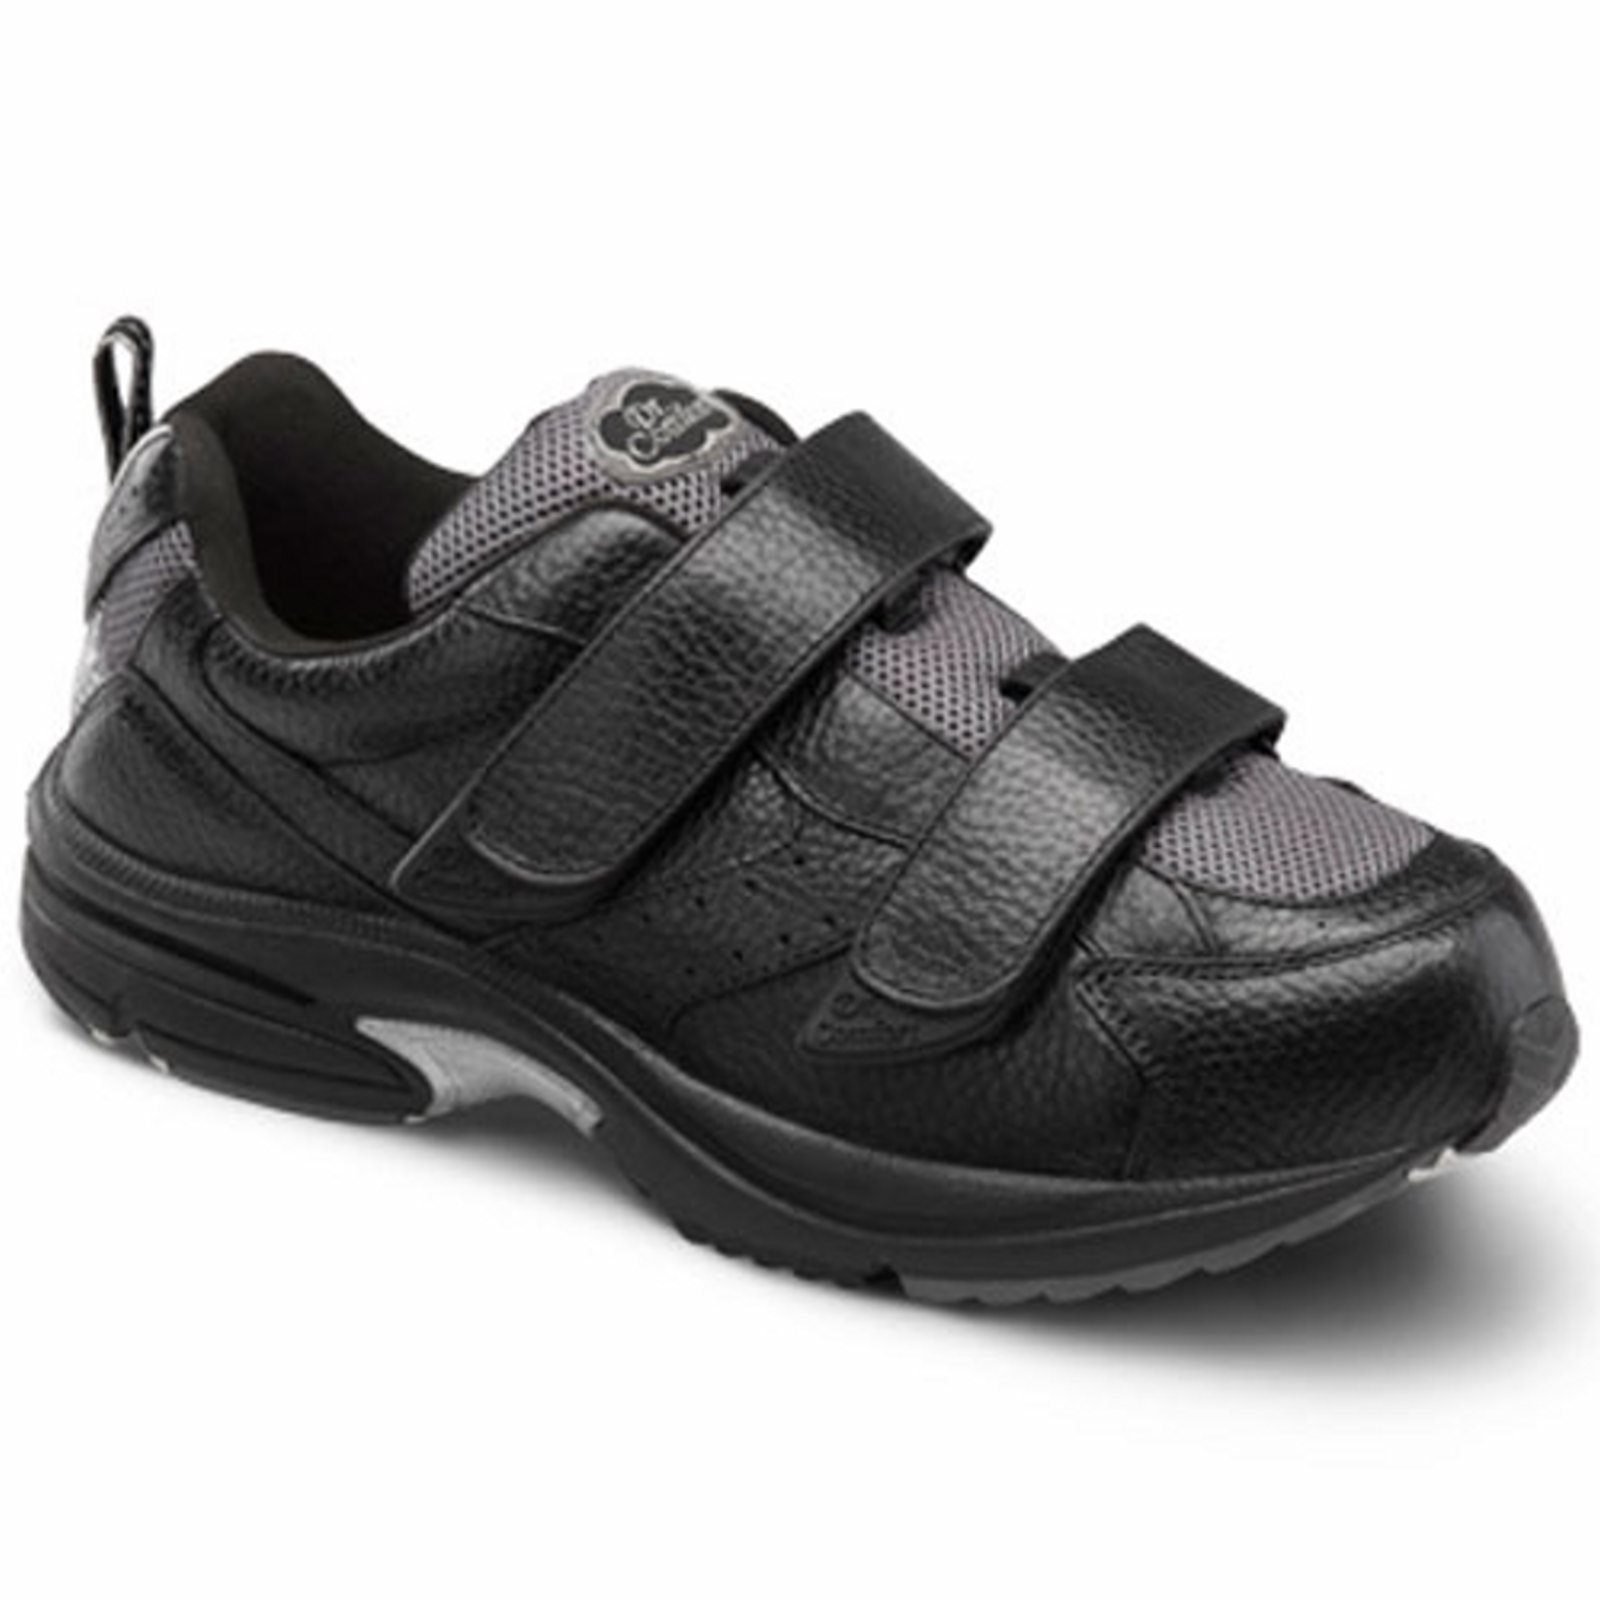 velcro medical shoes